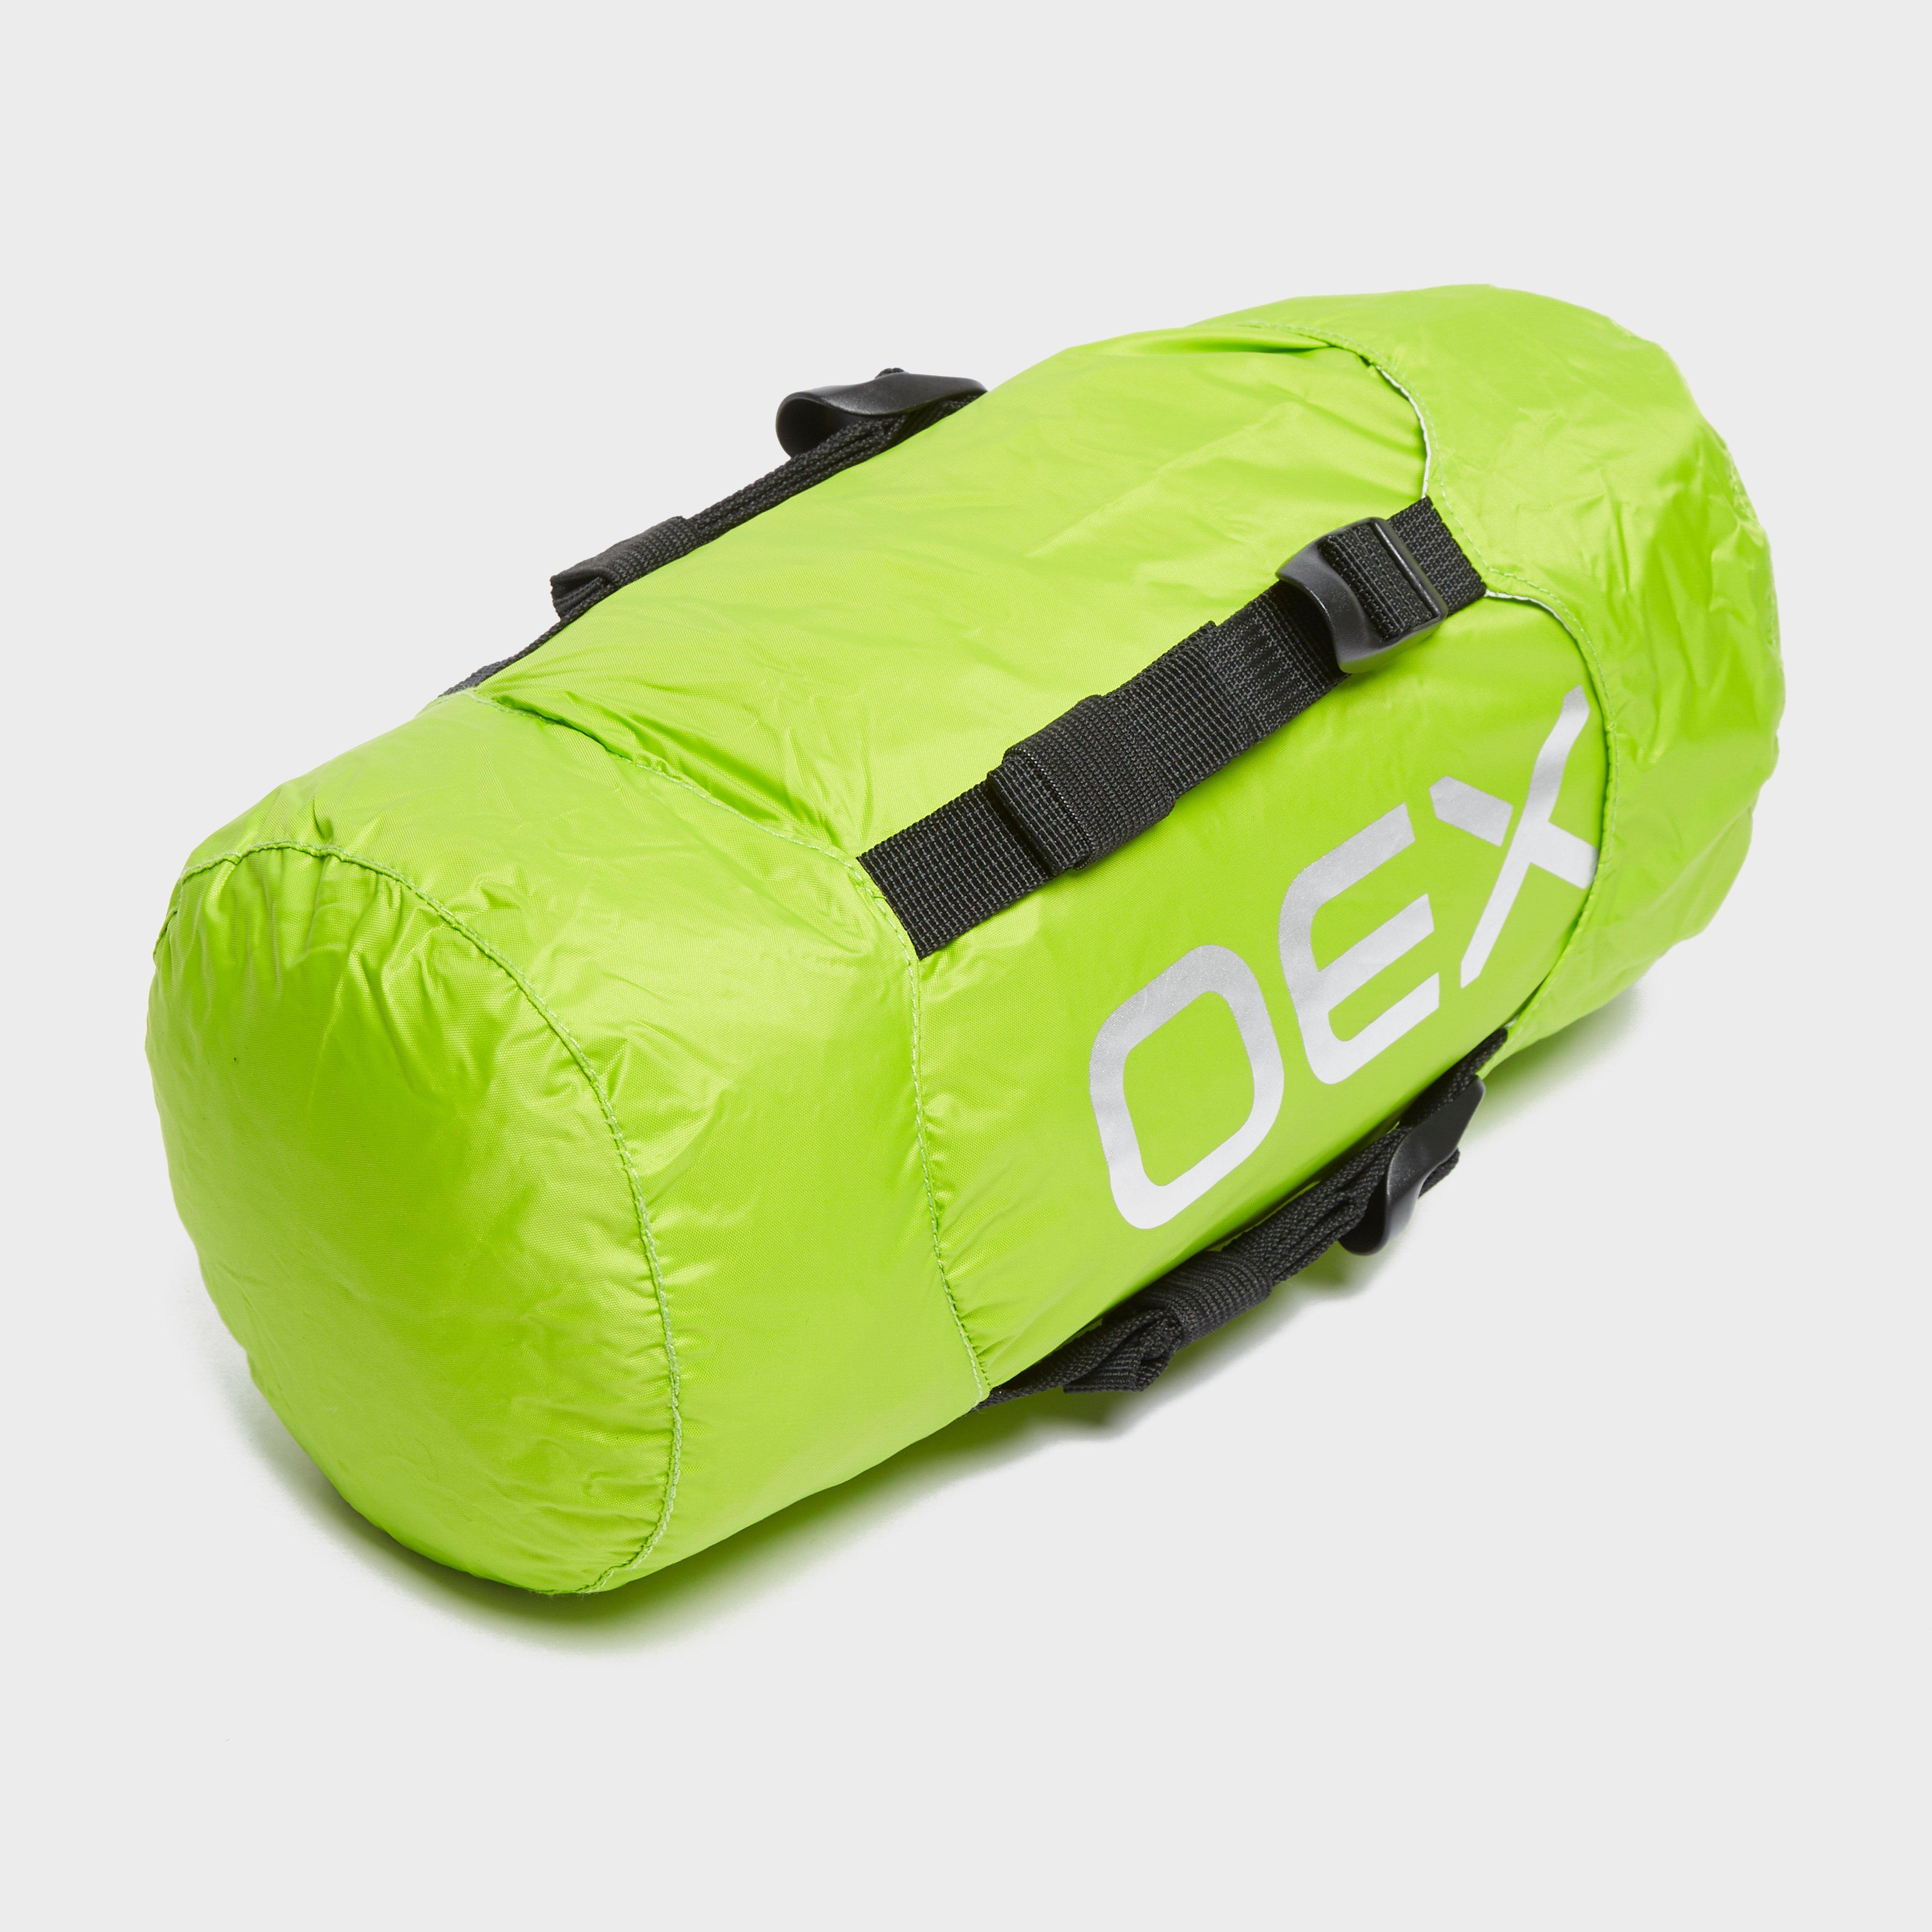 OEX Compression Sac 5 Review